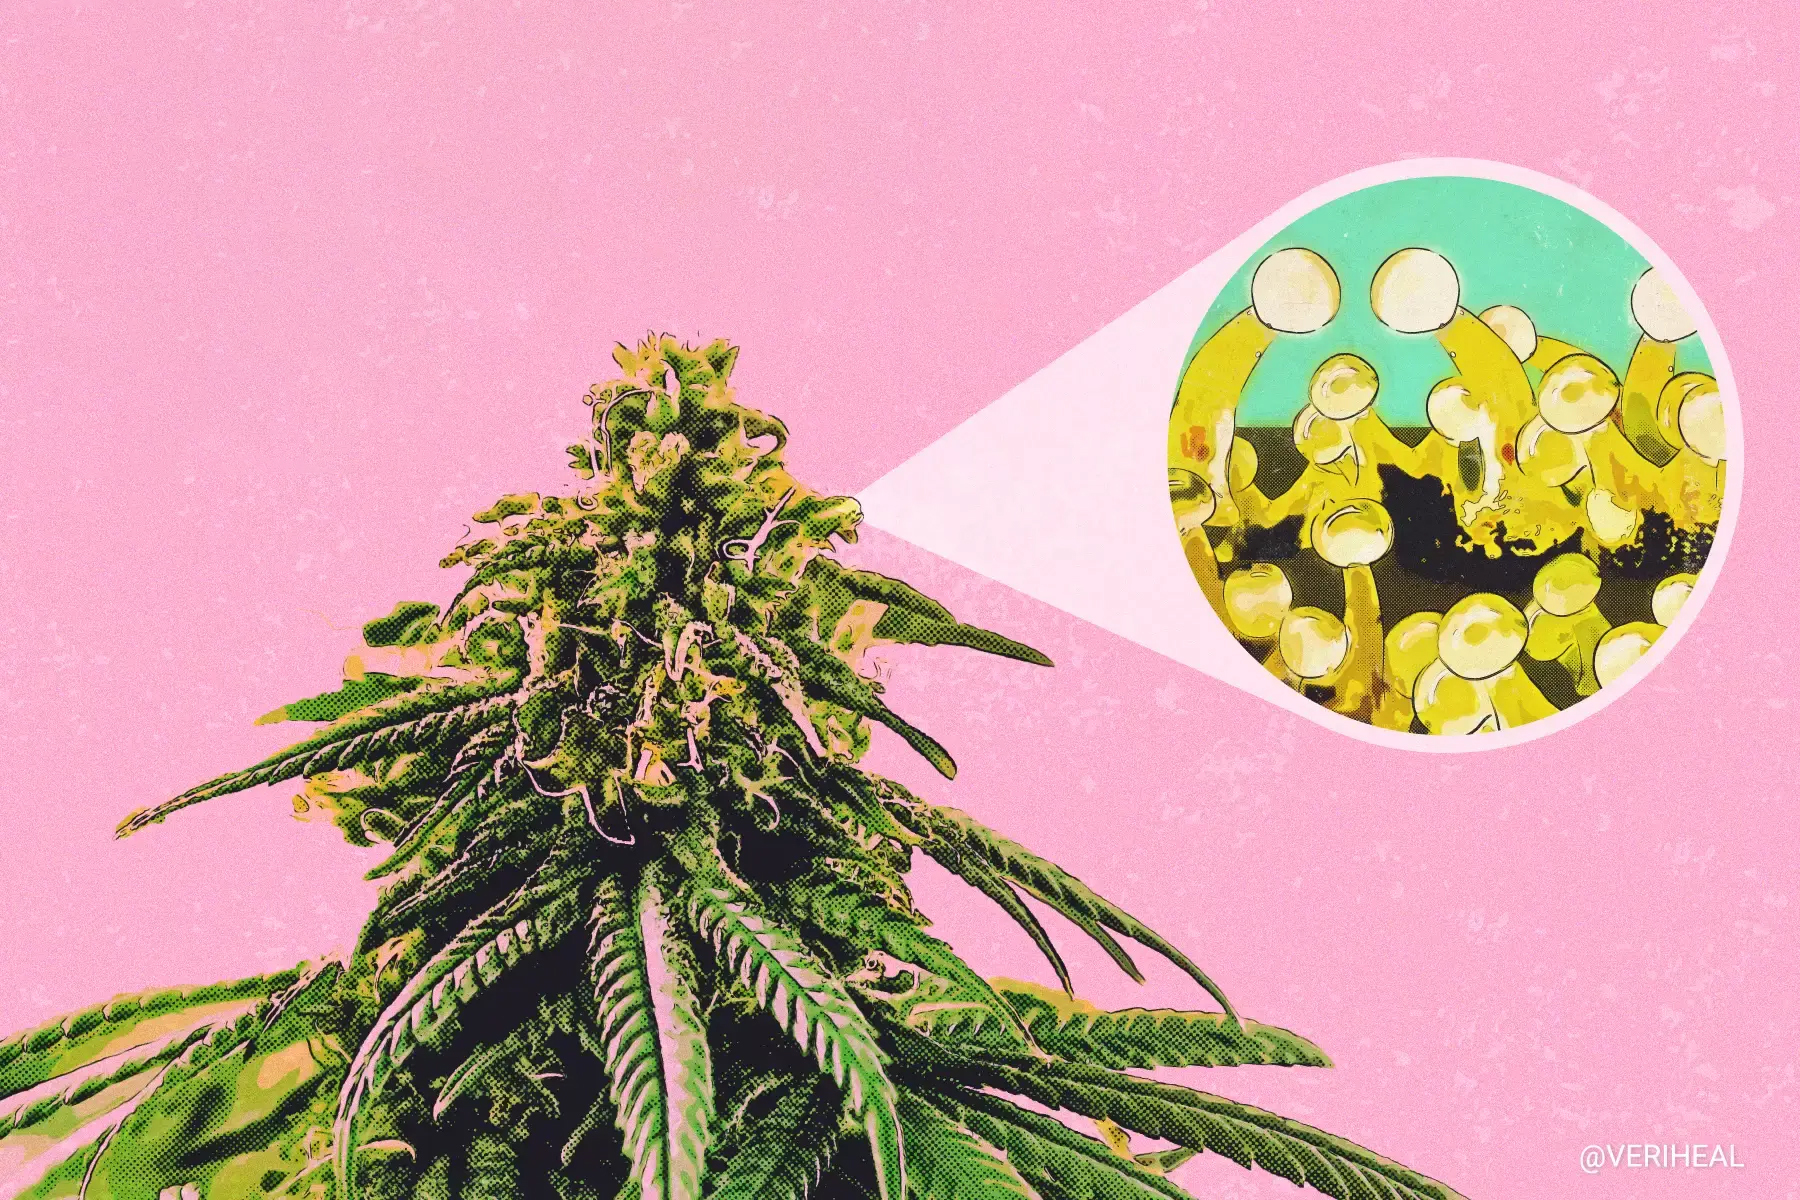 The Potency Puzzle: Decoding the Role of Trichomes in Cannabis